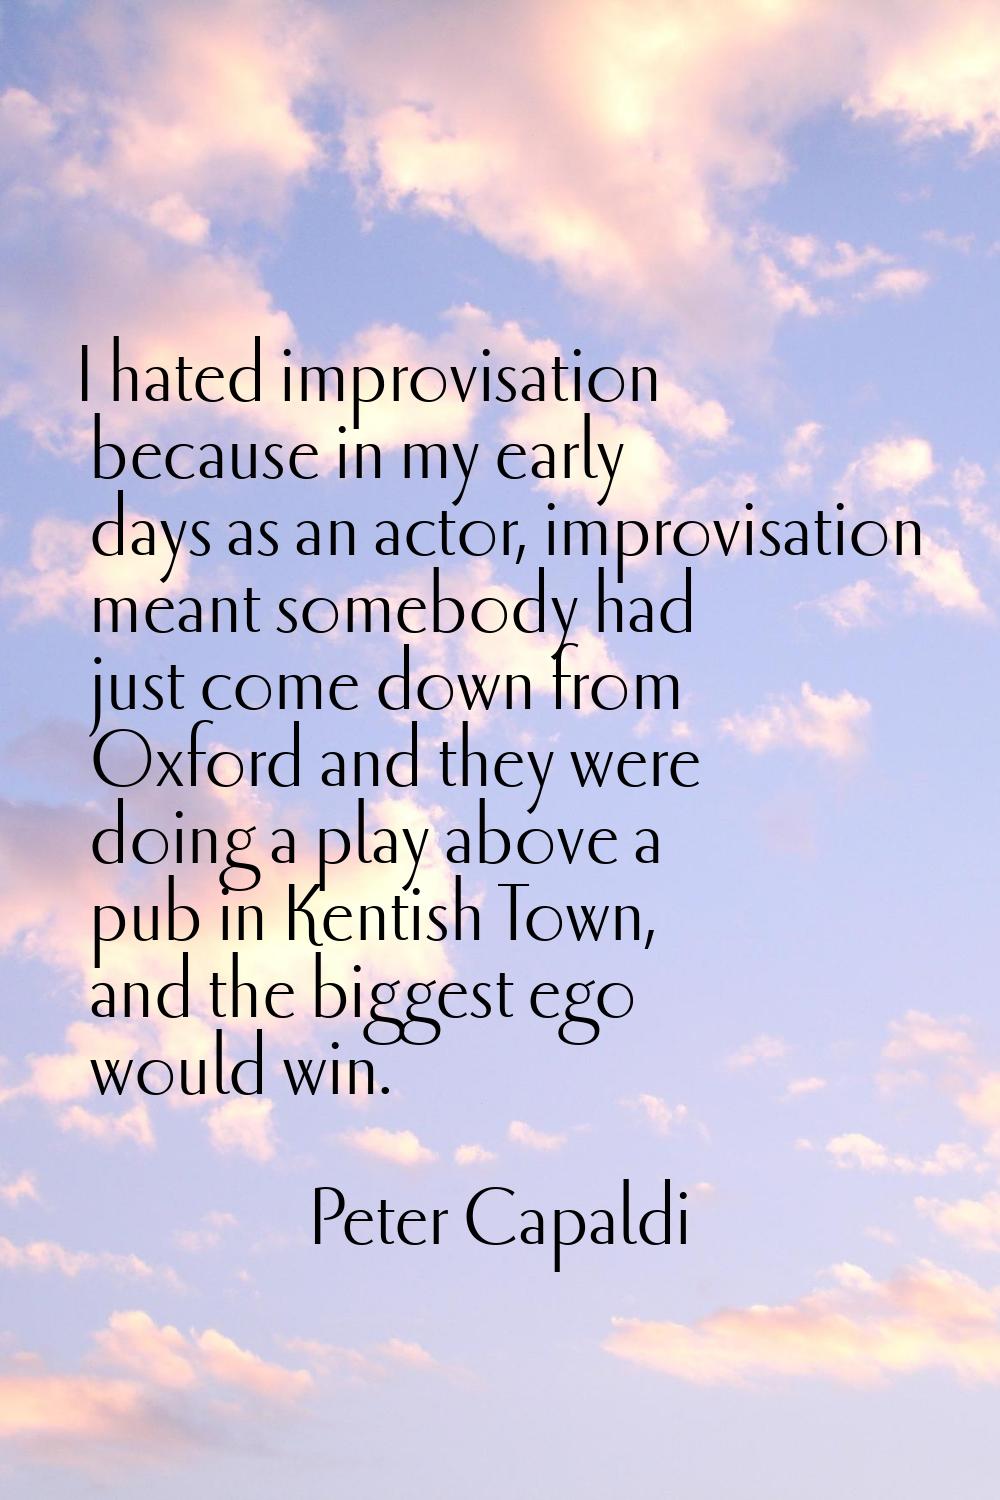 I hated improvisation because in my early days as an actor, improvisation meant somebody had just c